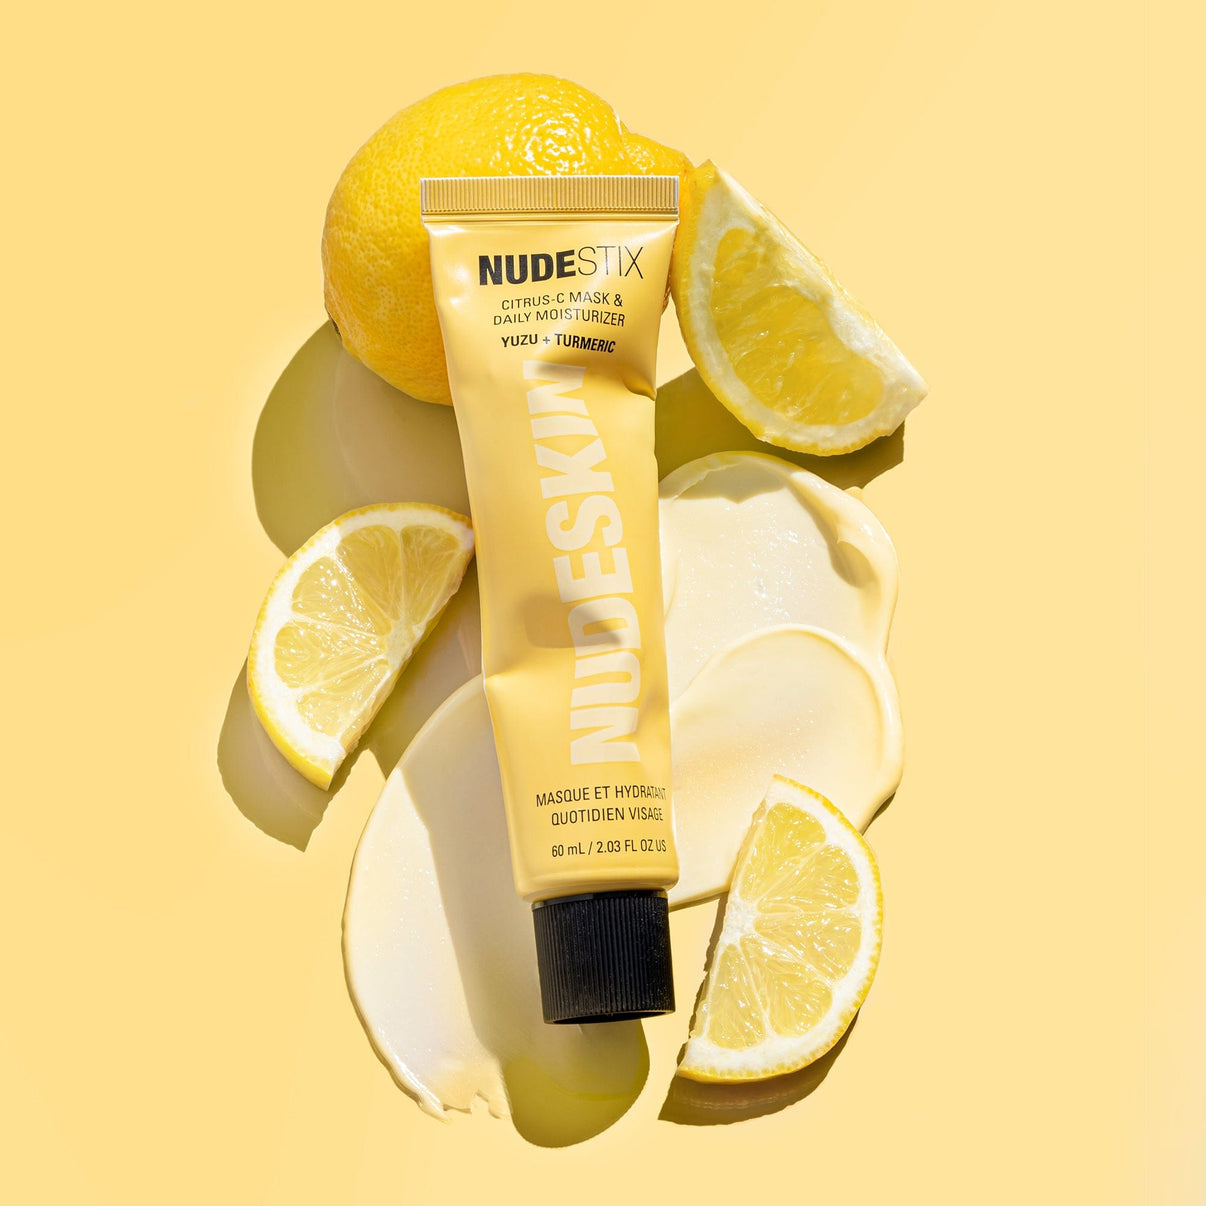 Citrus-c mask daily moisturizer flat lay with lemon and texture swatch - 7